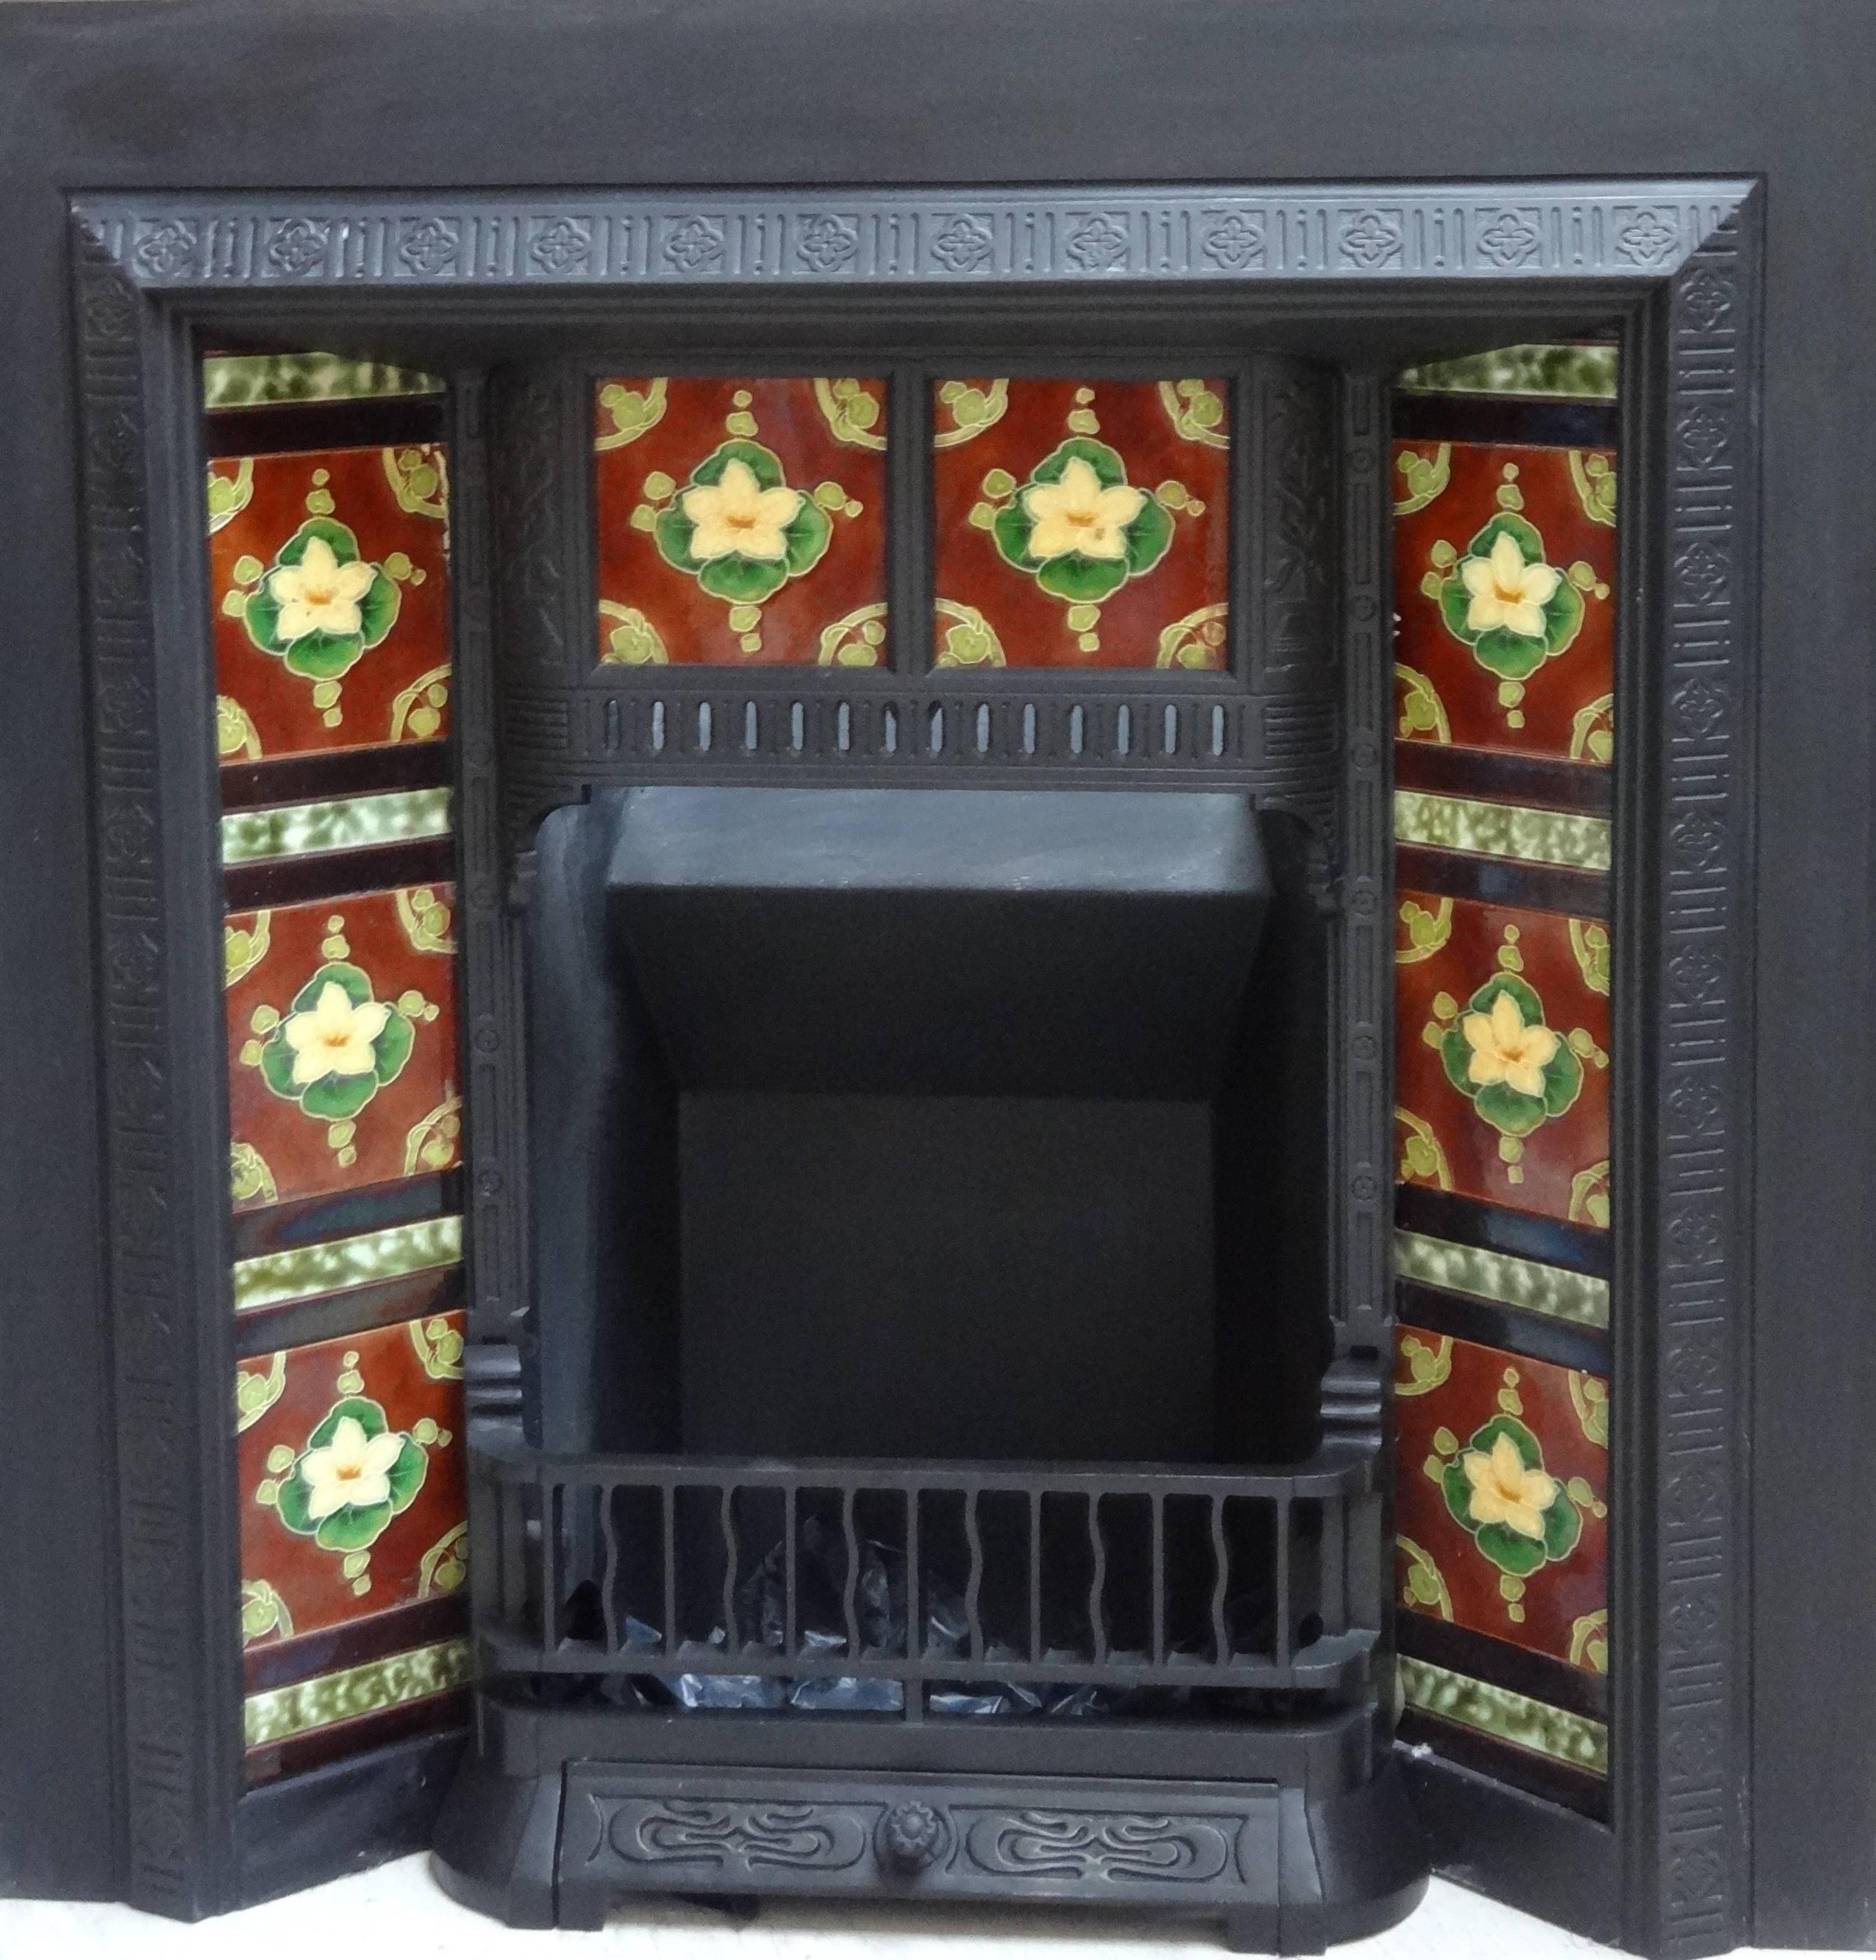 Reclaimed antique late 19th century Victorian cast Iron Insert complete with antique tiles.